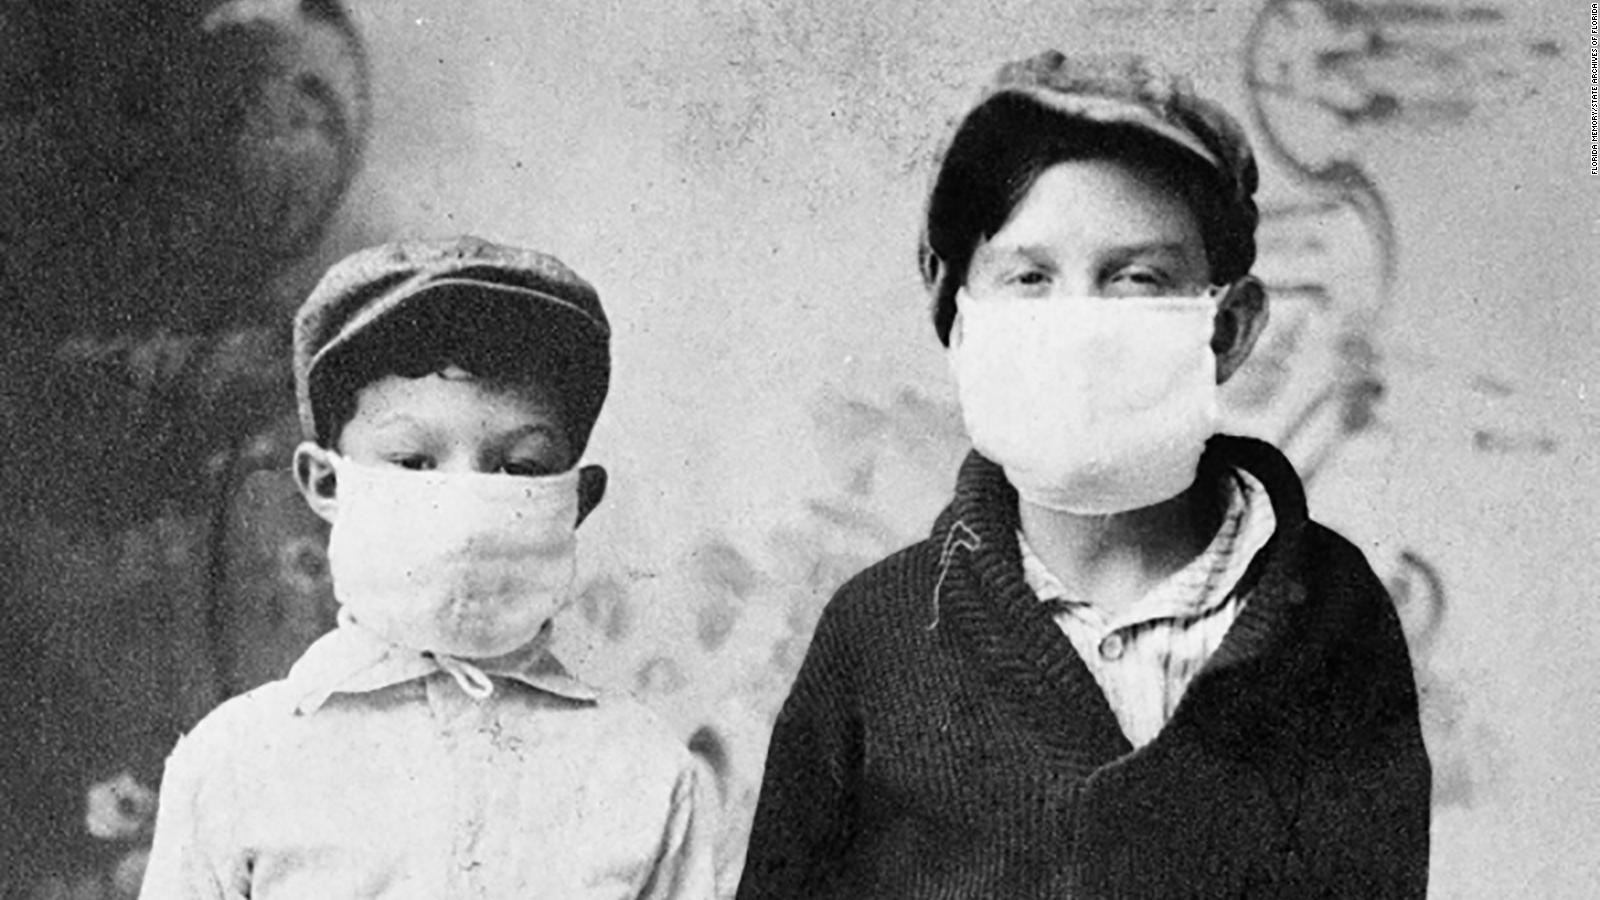 Youngsters Don Hoover and Joe Sistrunk of Starke, Florida are pictured wearing face coverings, ready for school, during the 1918 Spanish flu epidemic.